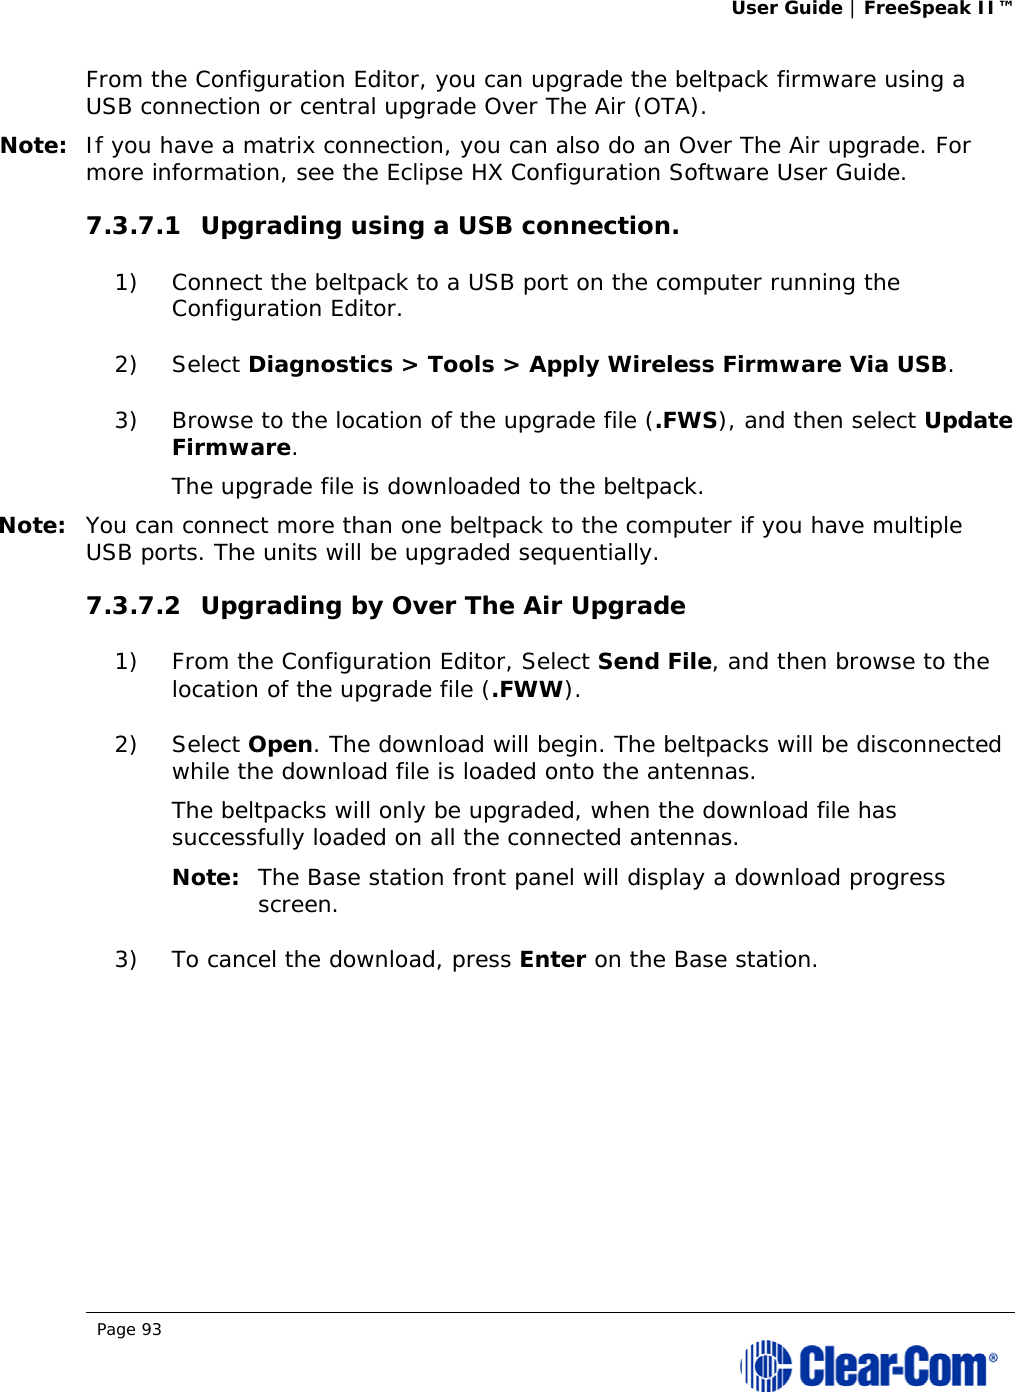 User Guide | FreeSpeak II™  Page 93  From the Configuration Editor, you can upgrade the beltpack firmware using a USB connection or central upgrade Over The Air (OTA). Note: If you have a matrix connection, you can also do an Over The Air upgrade. For more information, see the Eclipse HX Configuration Software User Guide. 7.3.7.1 Upgrading using a USB connection. 1) Connect the beltpack to a USB port on the computer running the Configuration Editor. 2) Select Diagnostics &gt; Tools &gt; Apply Wireless Firmware Via USB. 3) Browse to the location of the upgrade file (.FWS), and then select Update Firmware. The upgrade file is downloaded to the beltpack. Note: You can connect more than one beltpack to the computer if you have multiple USB ports. The units will be upgraded sequentially. 7.3.7.2 Upgrading by Over The Air Upgrade 1) From the Configuration Editor, Select Send File, and then browse to the location of the upgrade file (.FWW). 2) Select Open. The download will begin. The beltpacks will be disconnected while the download file is loaded onto the antennas. The beltpacks will only be upgraded, when the download file has successfully loaded on all the connected antennas.  Note: The Base station front panel will display a download progress screen. 3) To cancel the download, press Enter on the Base station. 